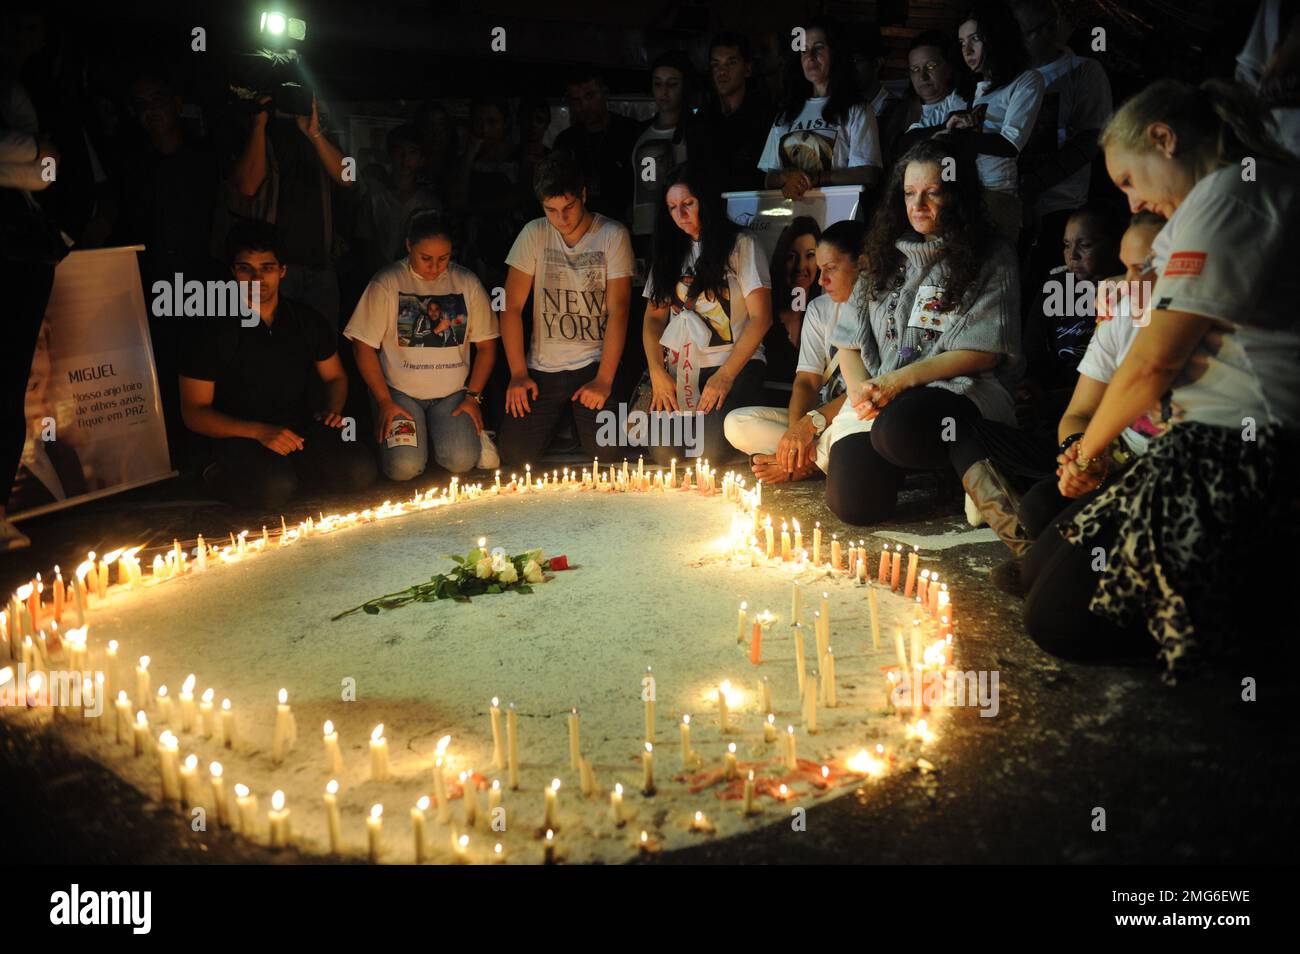 Boate Kiss nightclub Santa Maria city. Mourning vigil tribute to 242 people  died in 2013 a fire during band live show with fireworks - 01.27.2014 Stock Photo